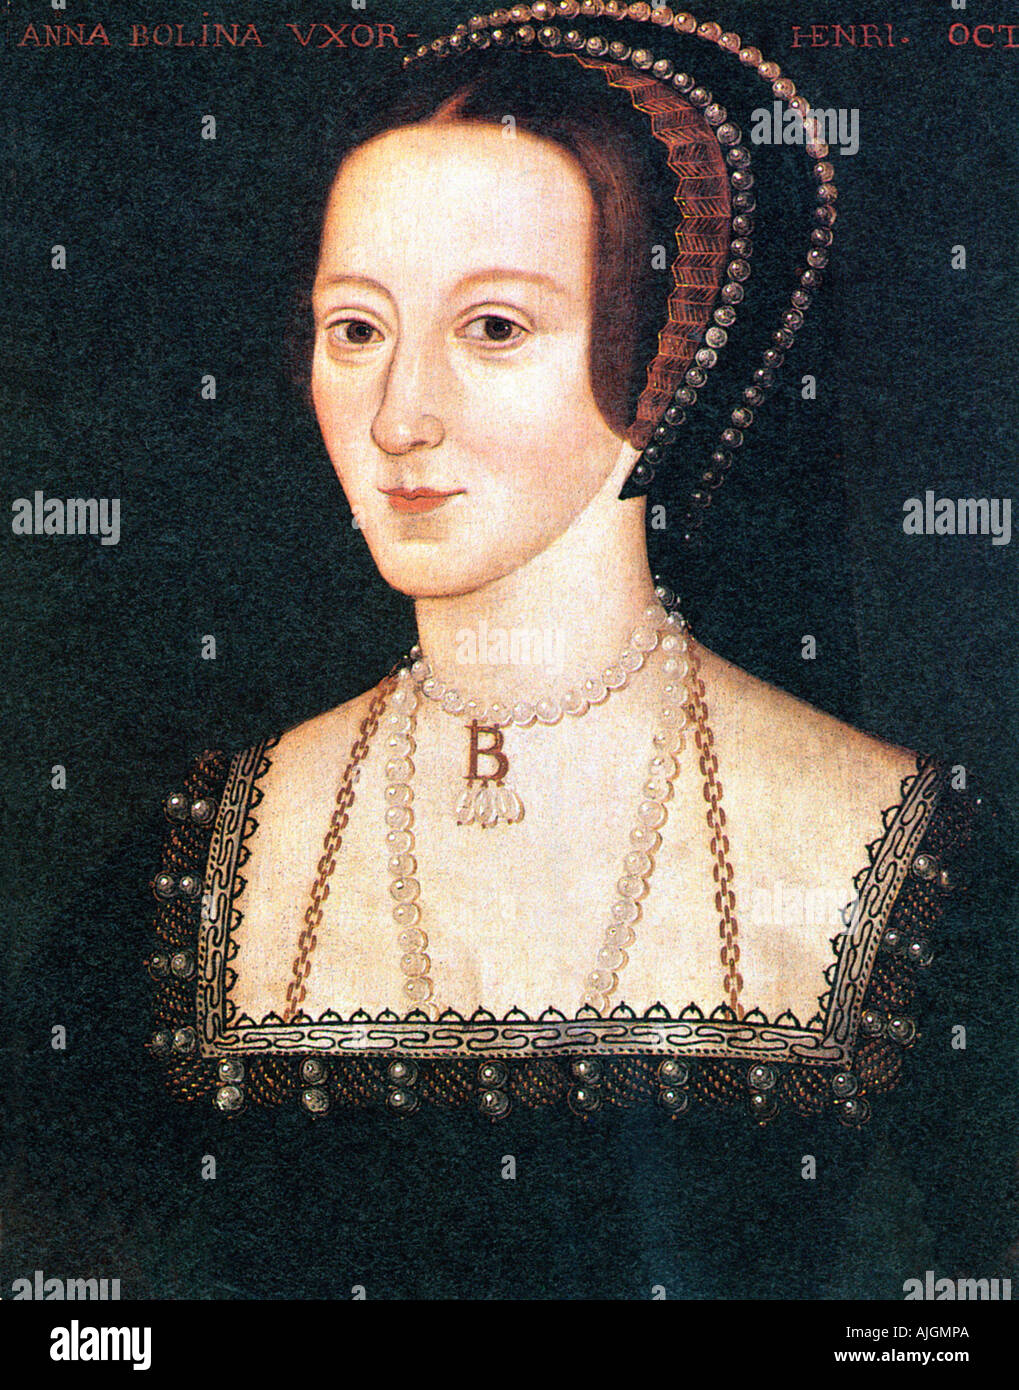 Anne Boleyn, 1533 portrait of the second wife of Henry VIII, ill-fated Queen of England beheaded in 1536 Stock Photo